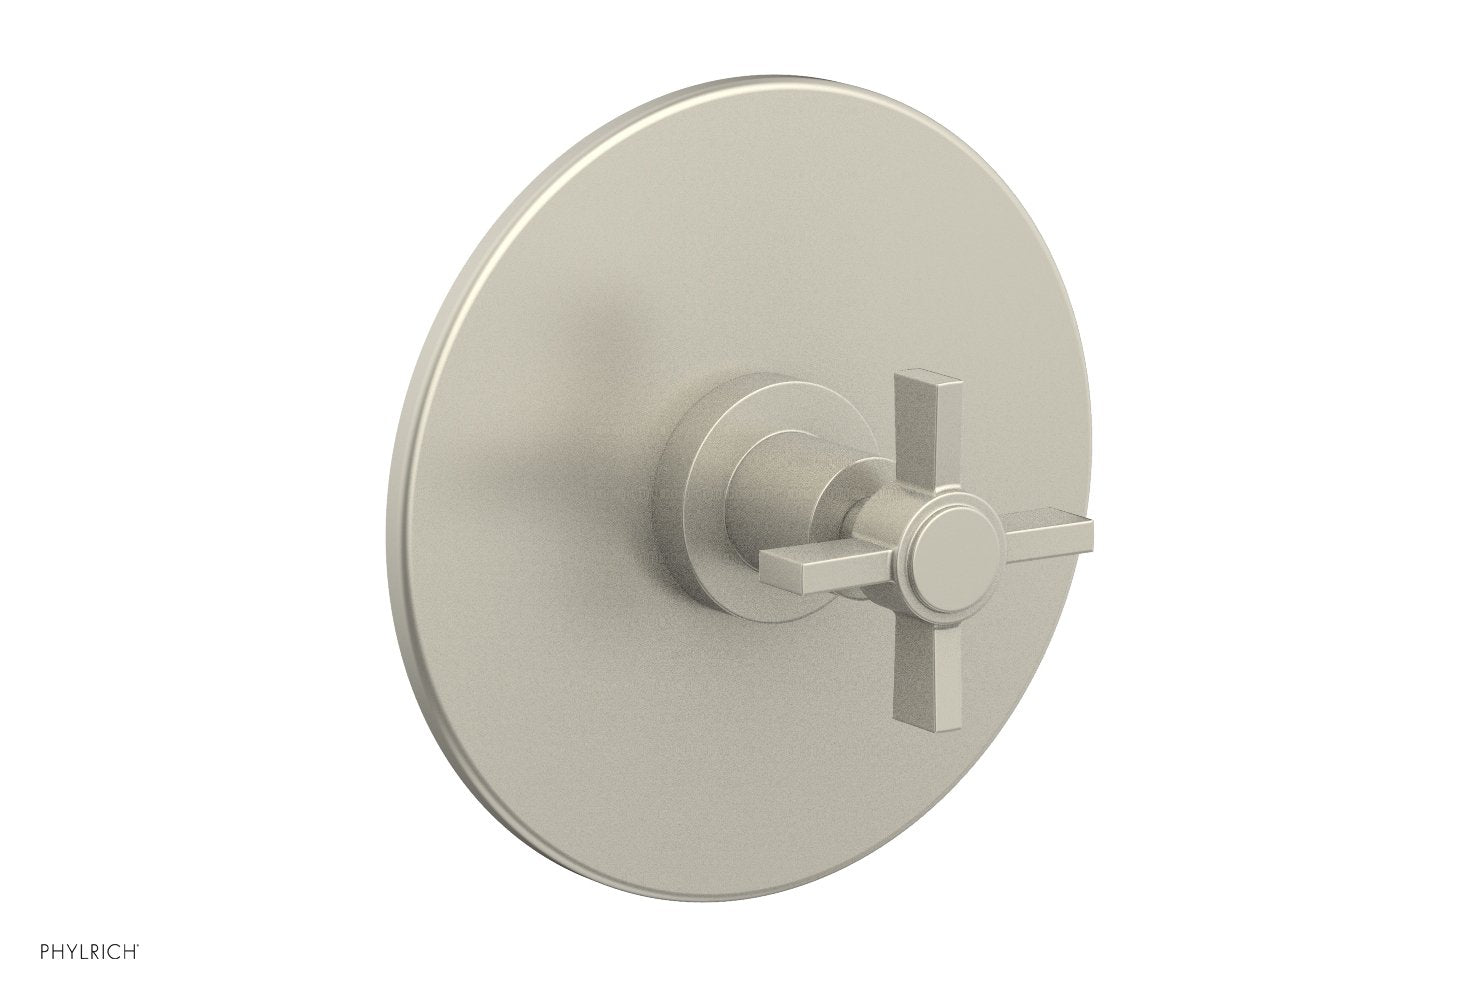 Phylrich BASIC 3/4" Thermostatic Shower Trim - Blade Cross Handle